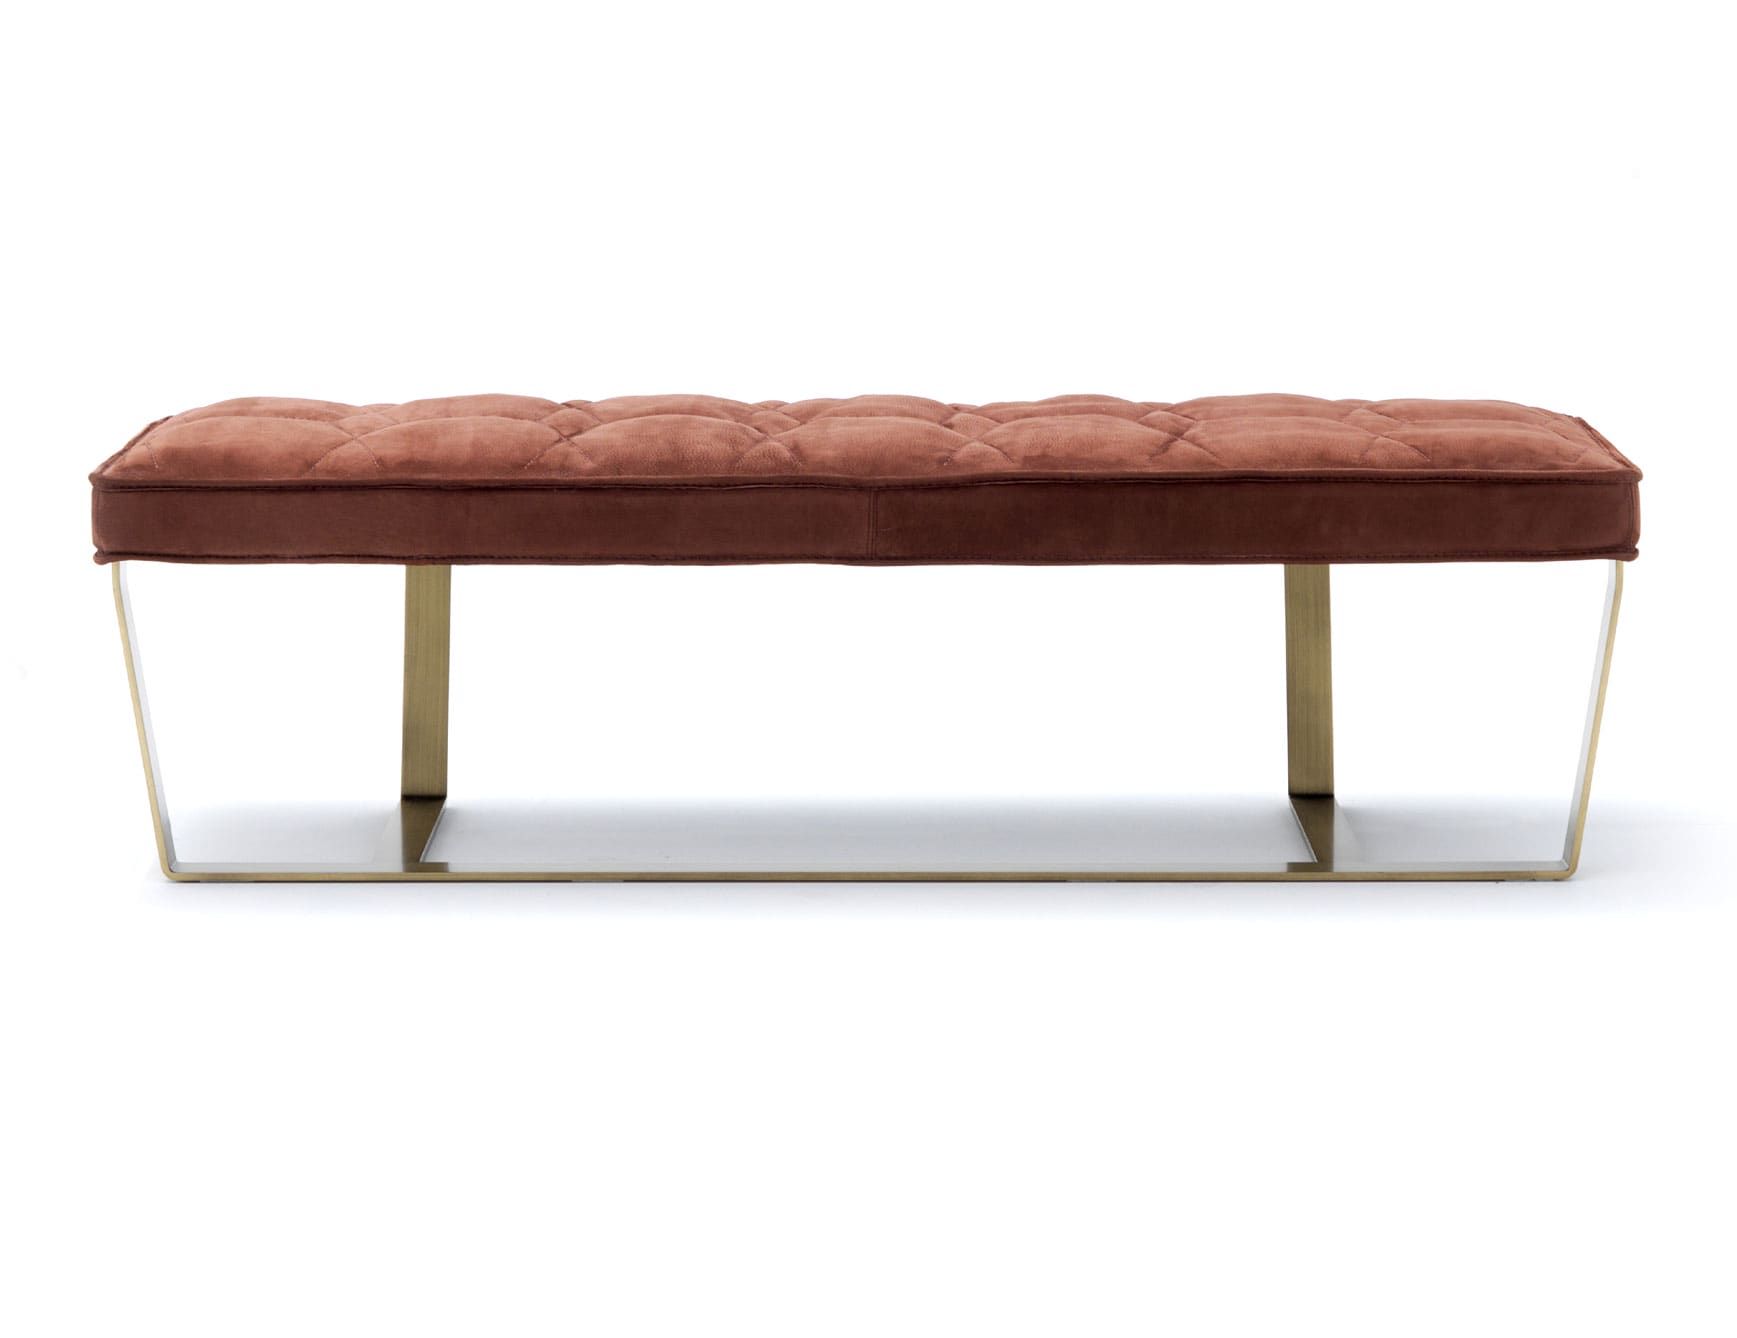 Desire modern Italian ottoman bench with red leather